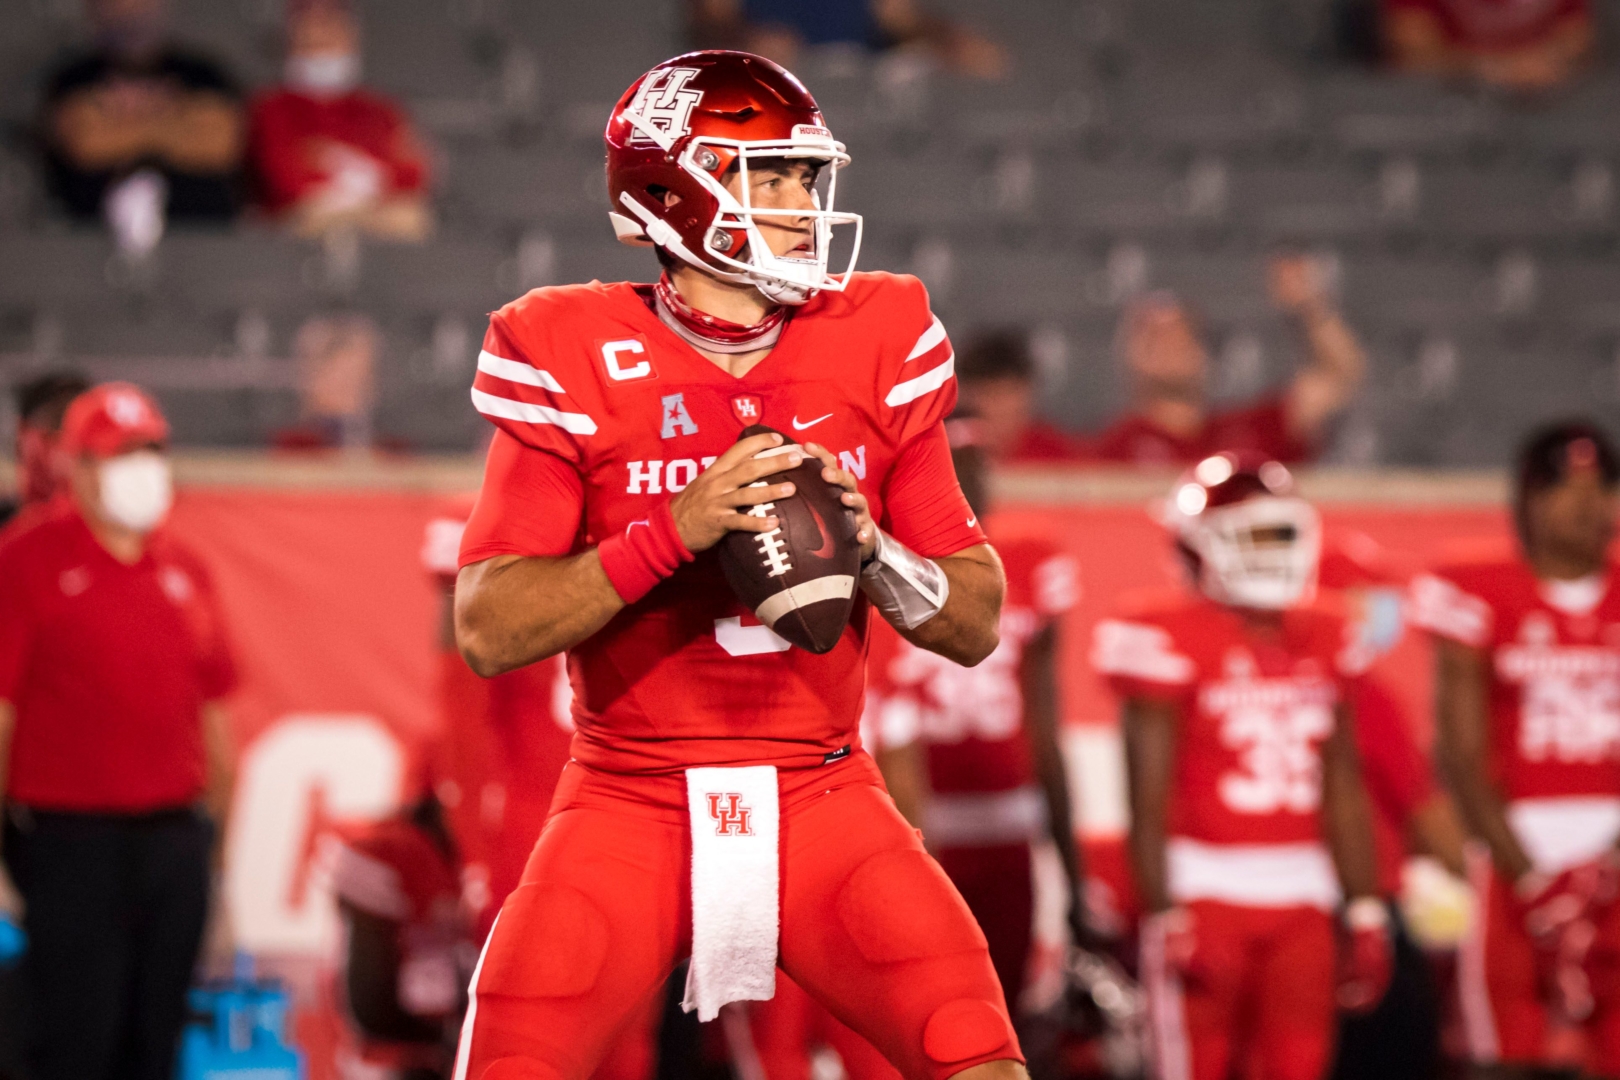 Houston quarterback Clayton Tune drops back to pass against Tulane earlier in the season | Courtesy of UH athletics